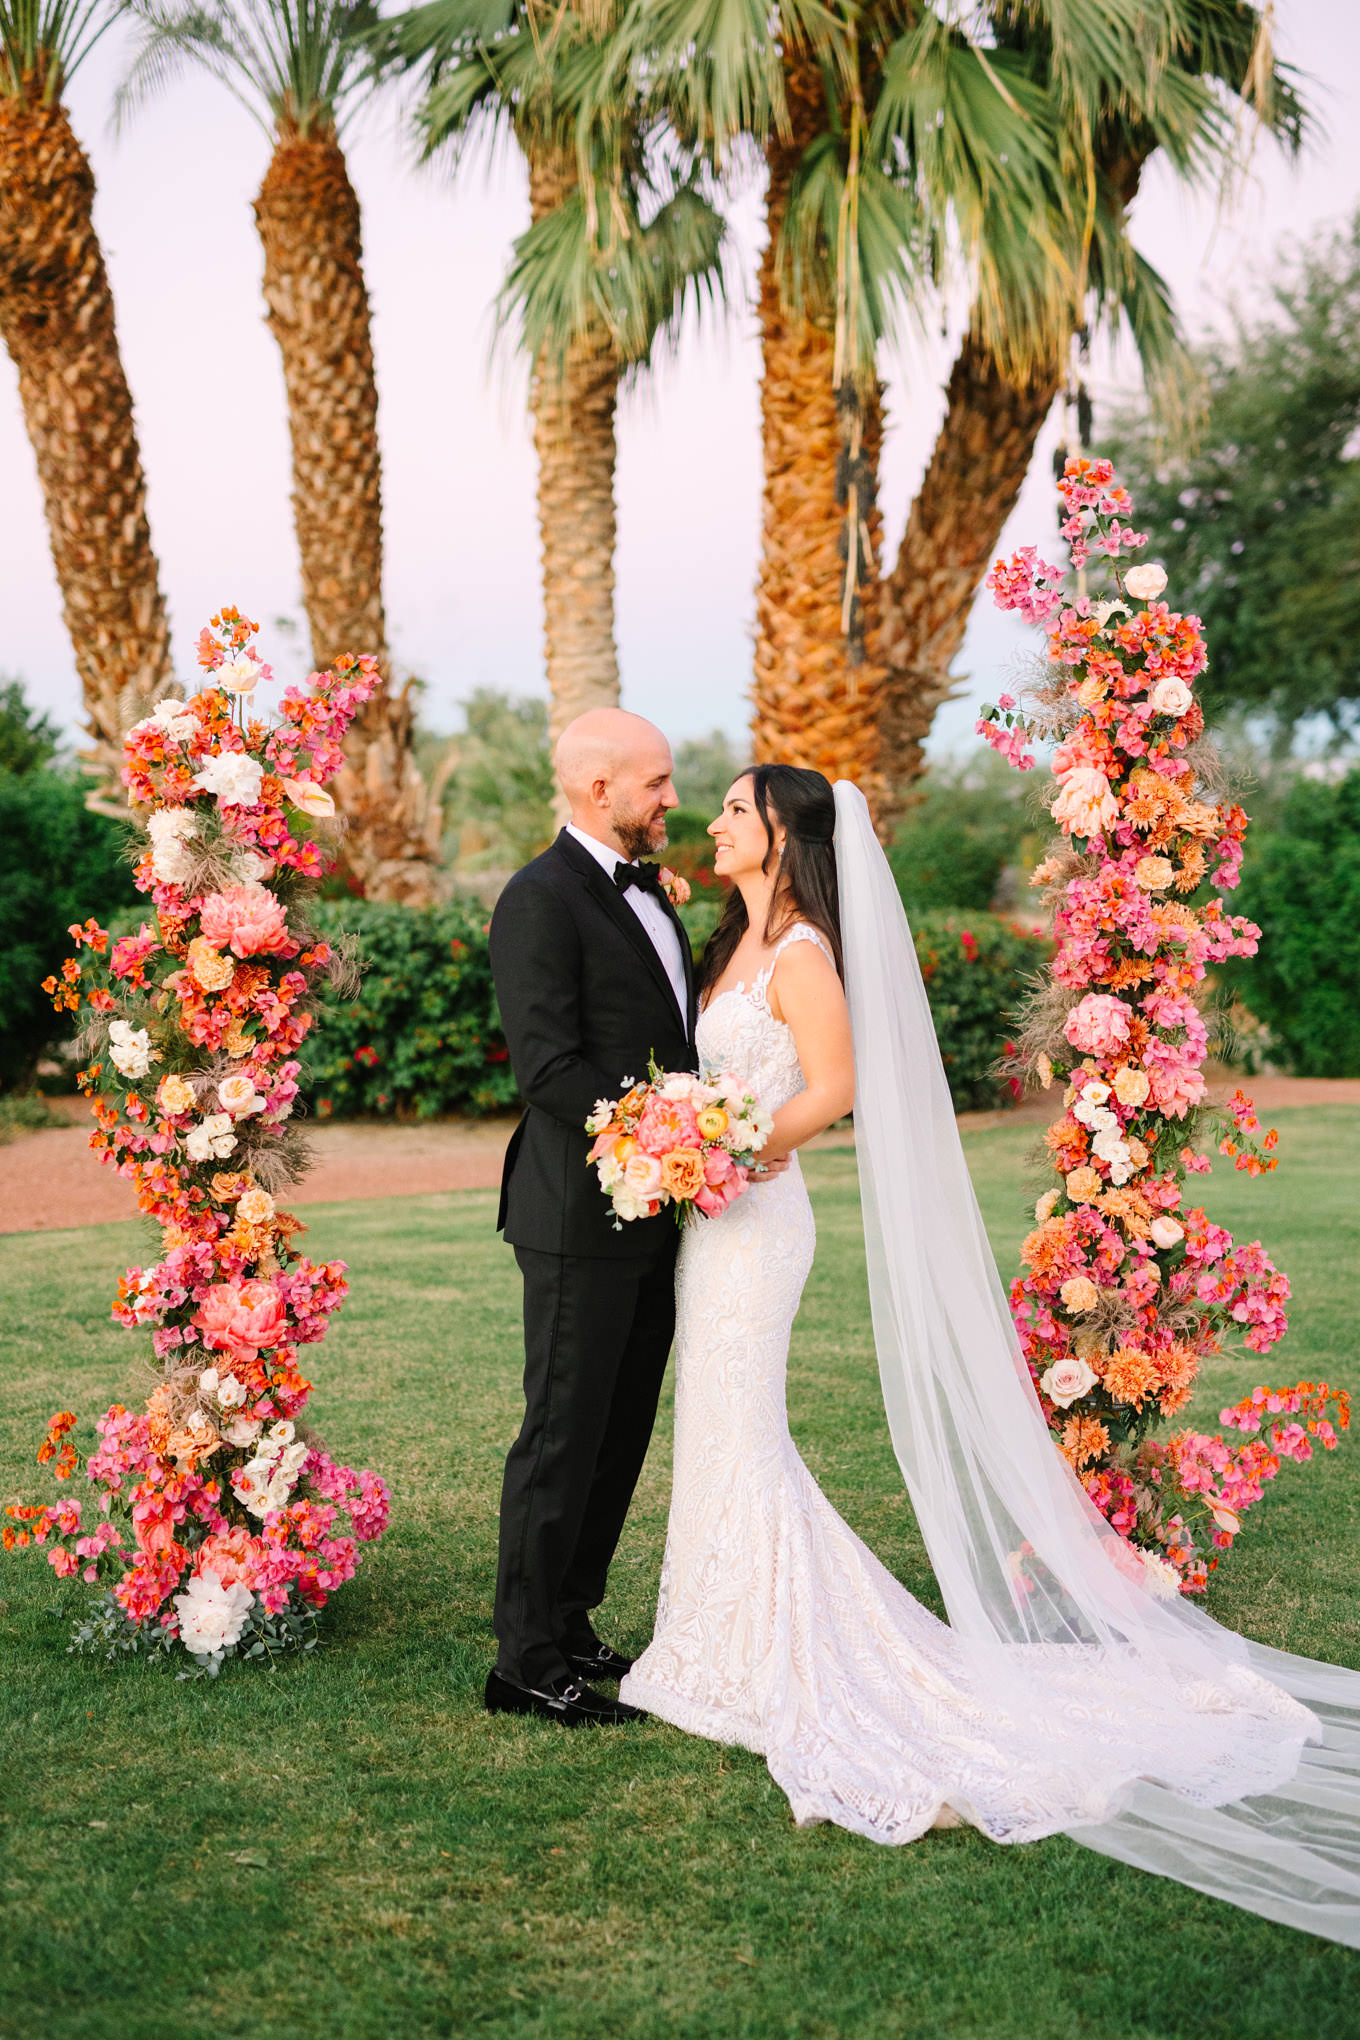 Bride and Groom at the altar | Pink Bougainvillea Estate wedding | Colorful LA wedding photography | #bougainvilleaestate #palmspringswedding #palmspringsweddingvenue #palmspringsphotographer Source: Mary Costa Photography | Los Angeles